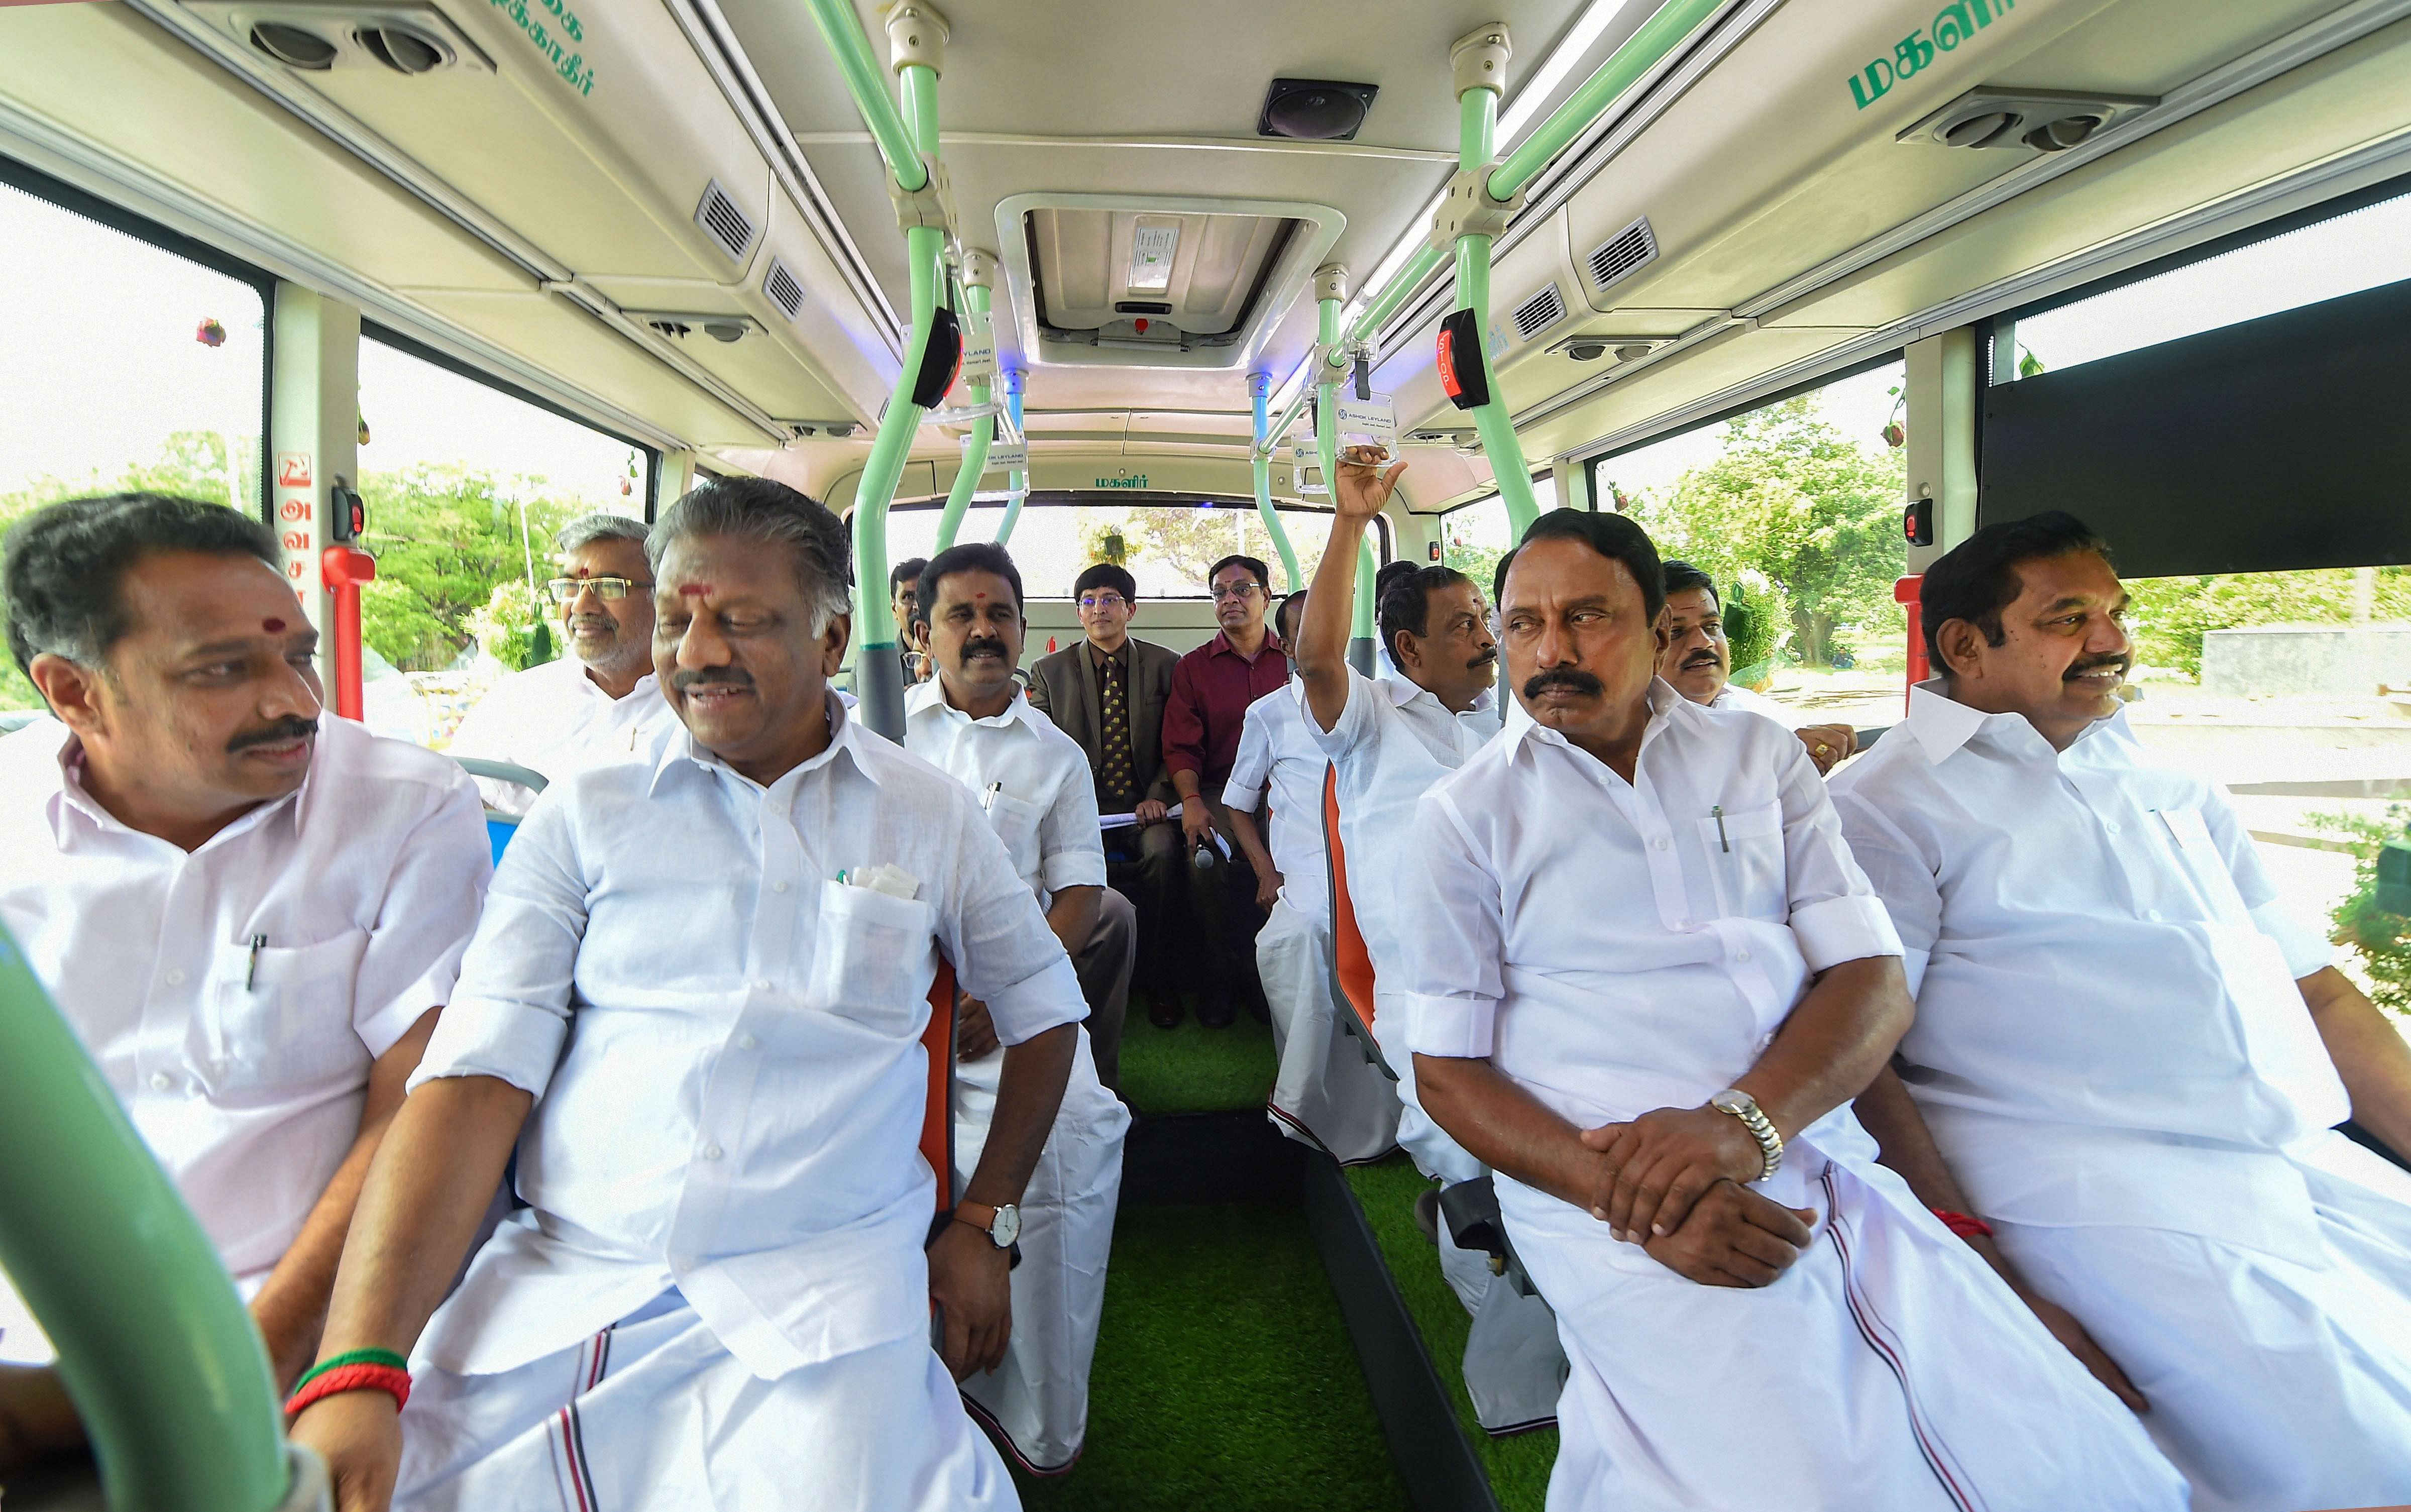 Tamil Nadu Chief Minister Edappadi K Palaniswami sits in an electric bus for the MTC on a trial basis, at Fort St. George in Chennai. (PTI Photo)